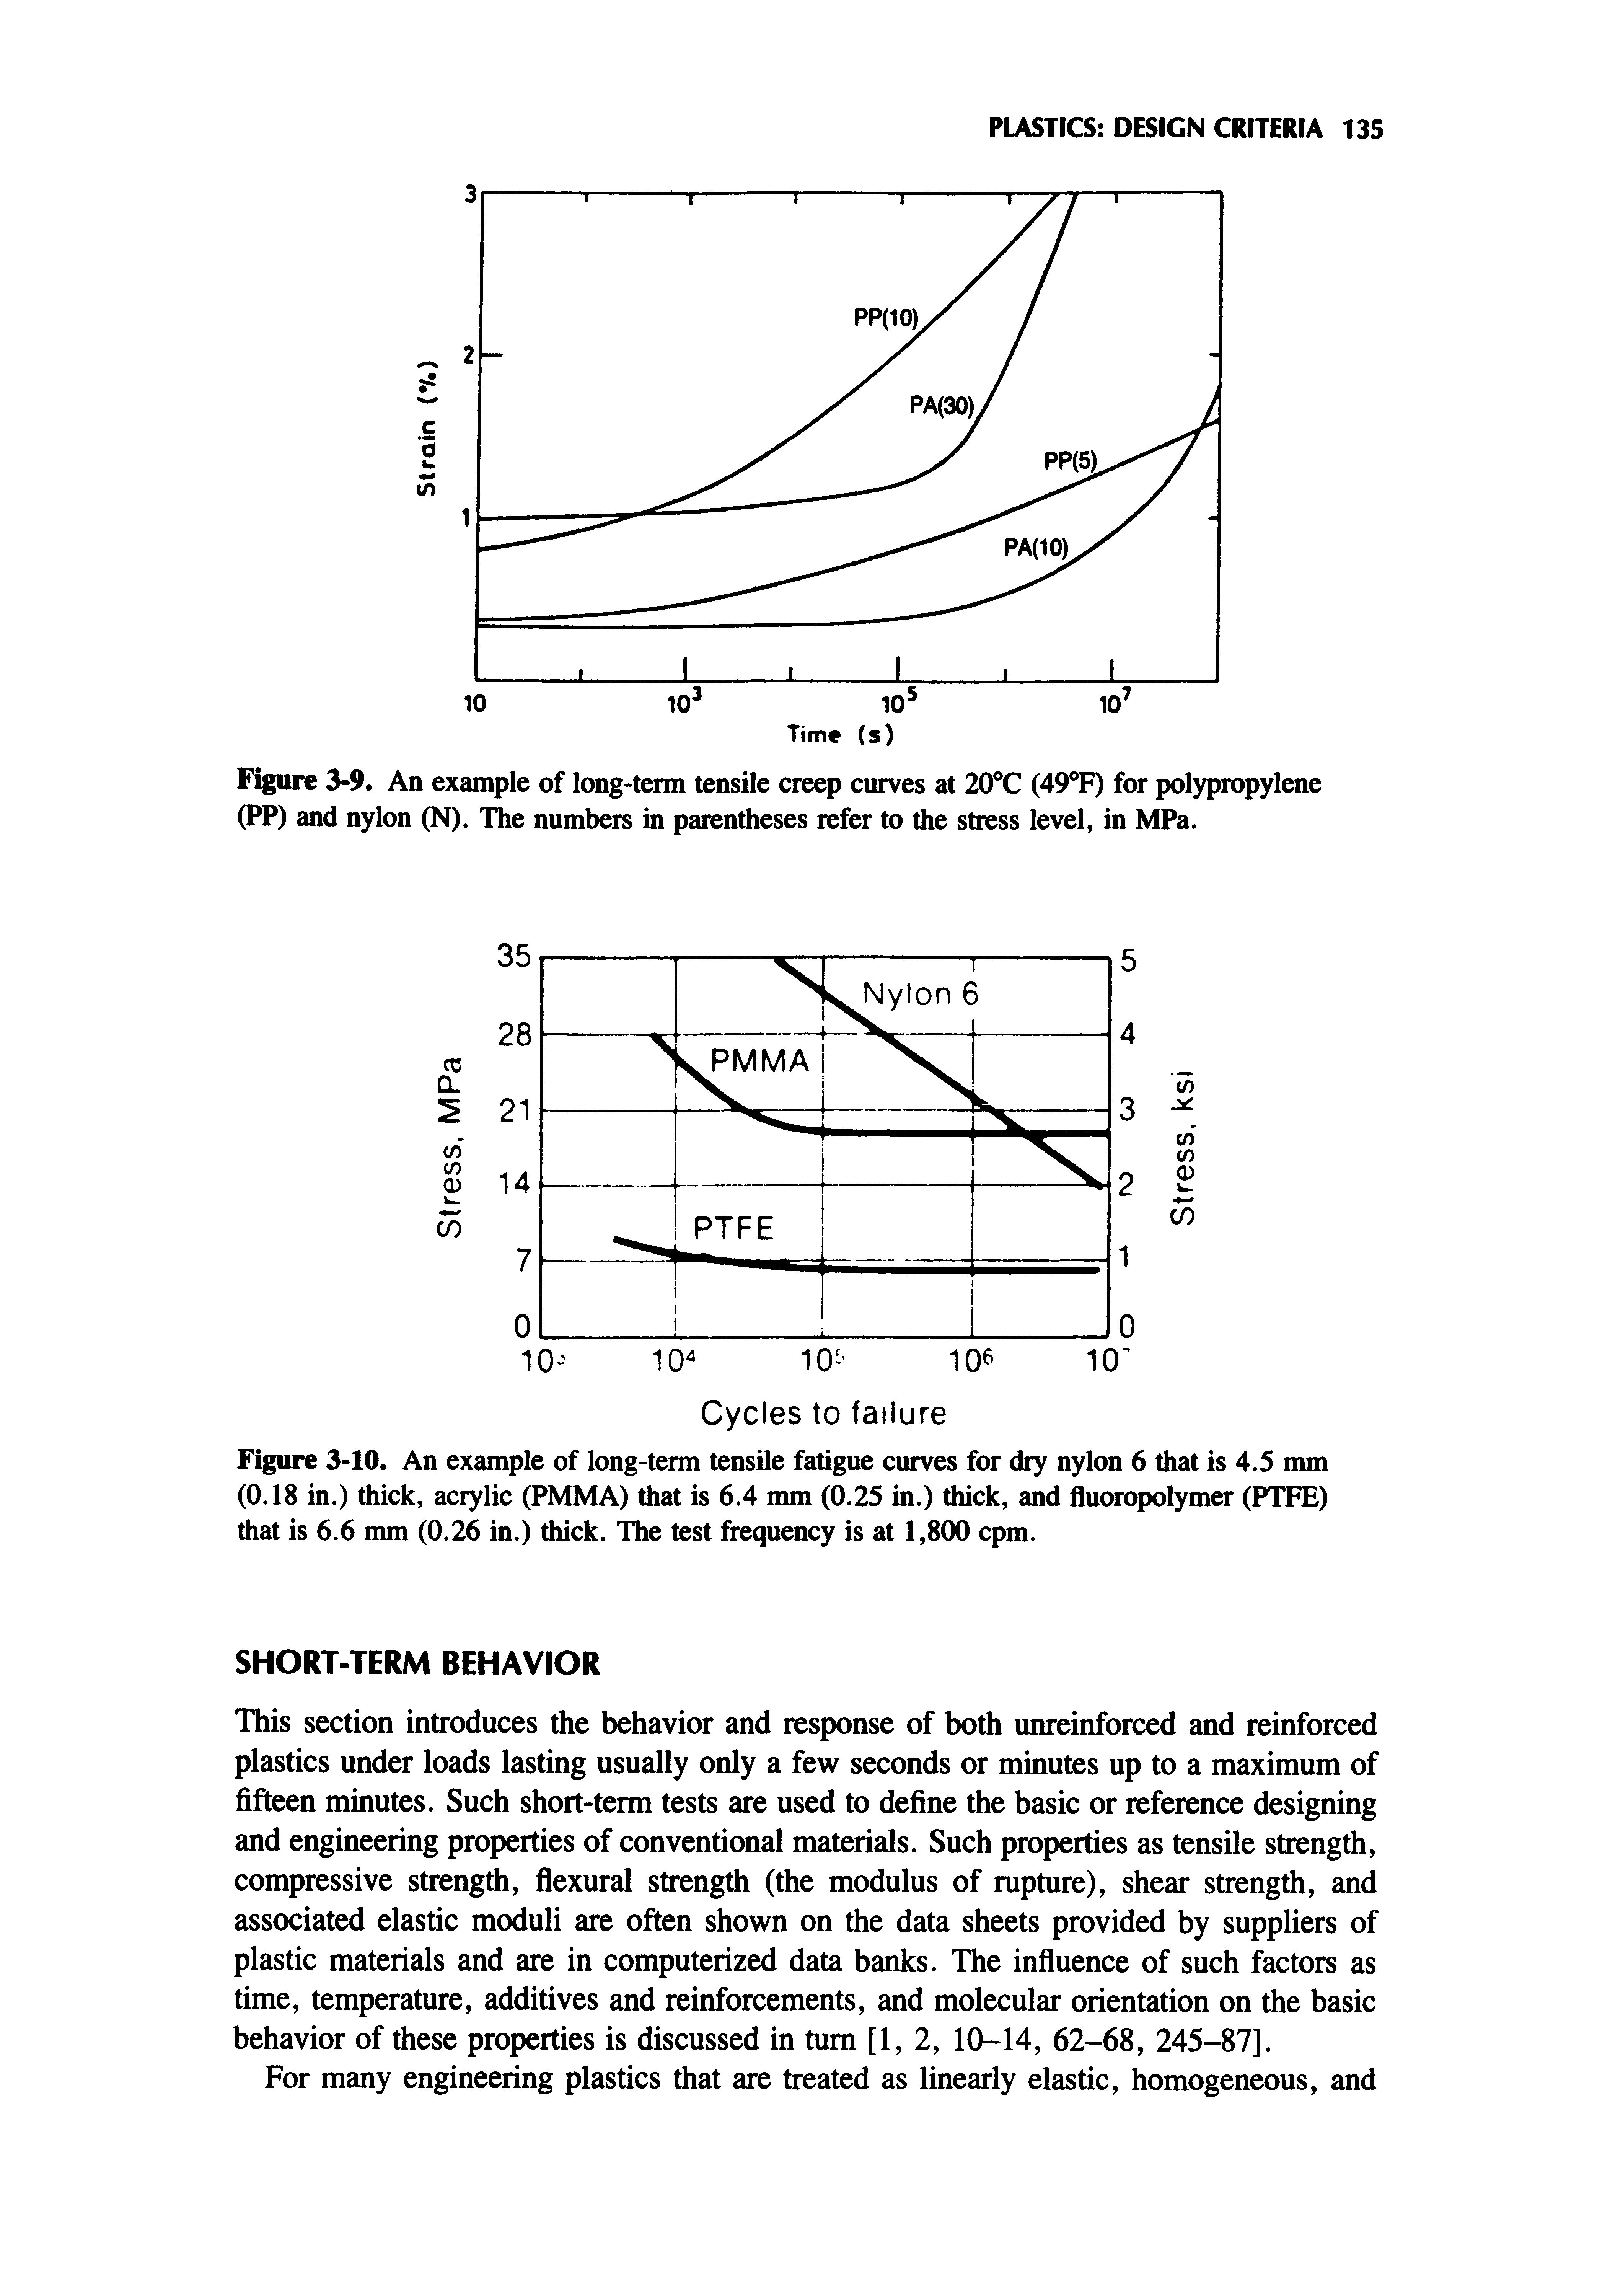 Figure 3-9. An example of long-term tensile creep curves at 20 C (49 F) for polypropylene (PP) and nylon (N). The numbers in parentheses refer to the stress level, in MPa.